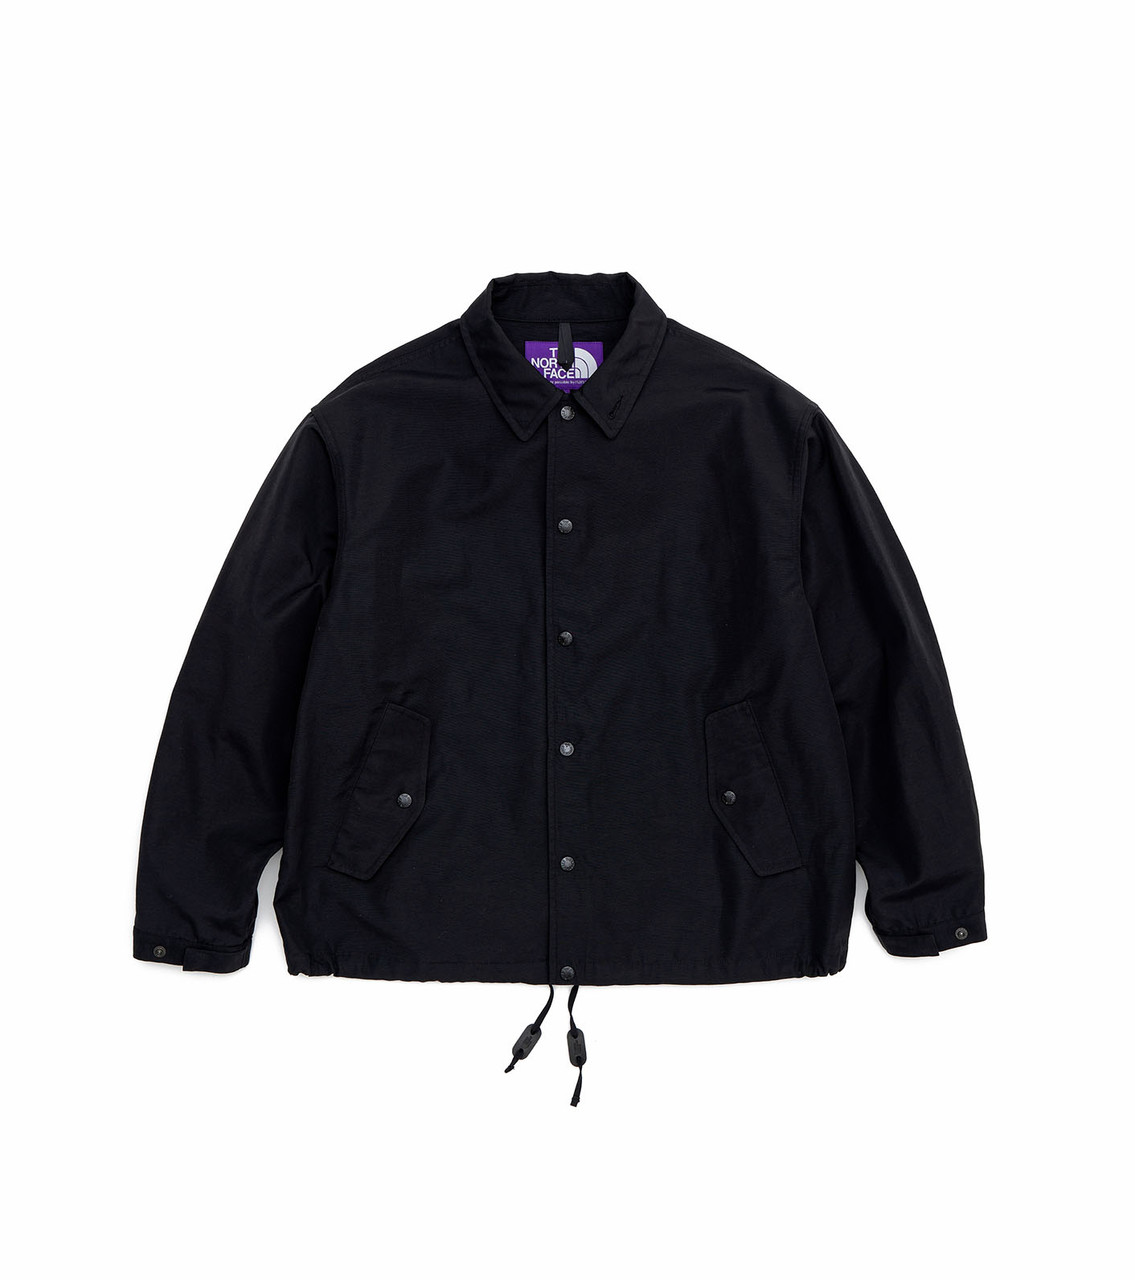 THE NORTH FACE PURPLE LABEL JACKET Mountain Wind Coach Jacket